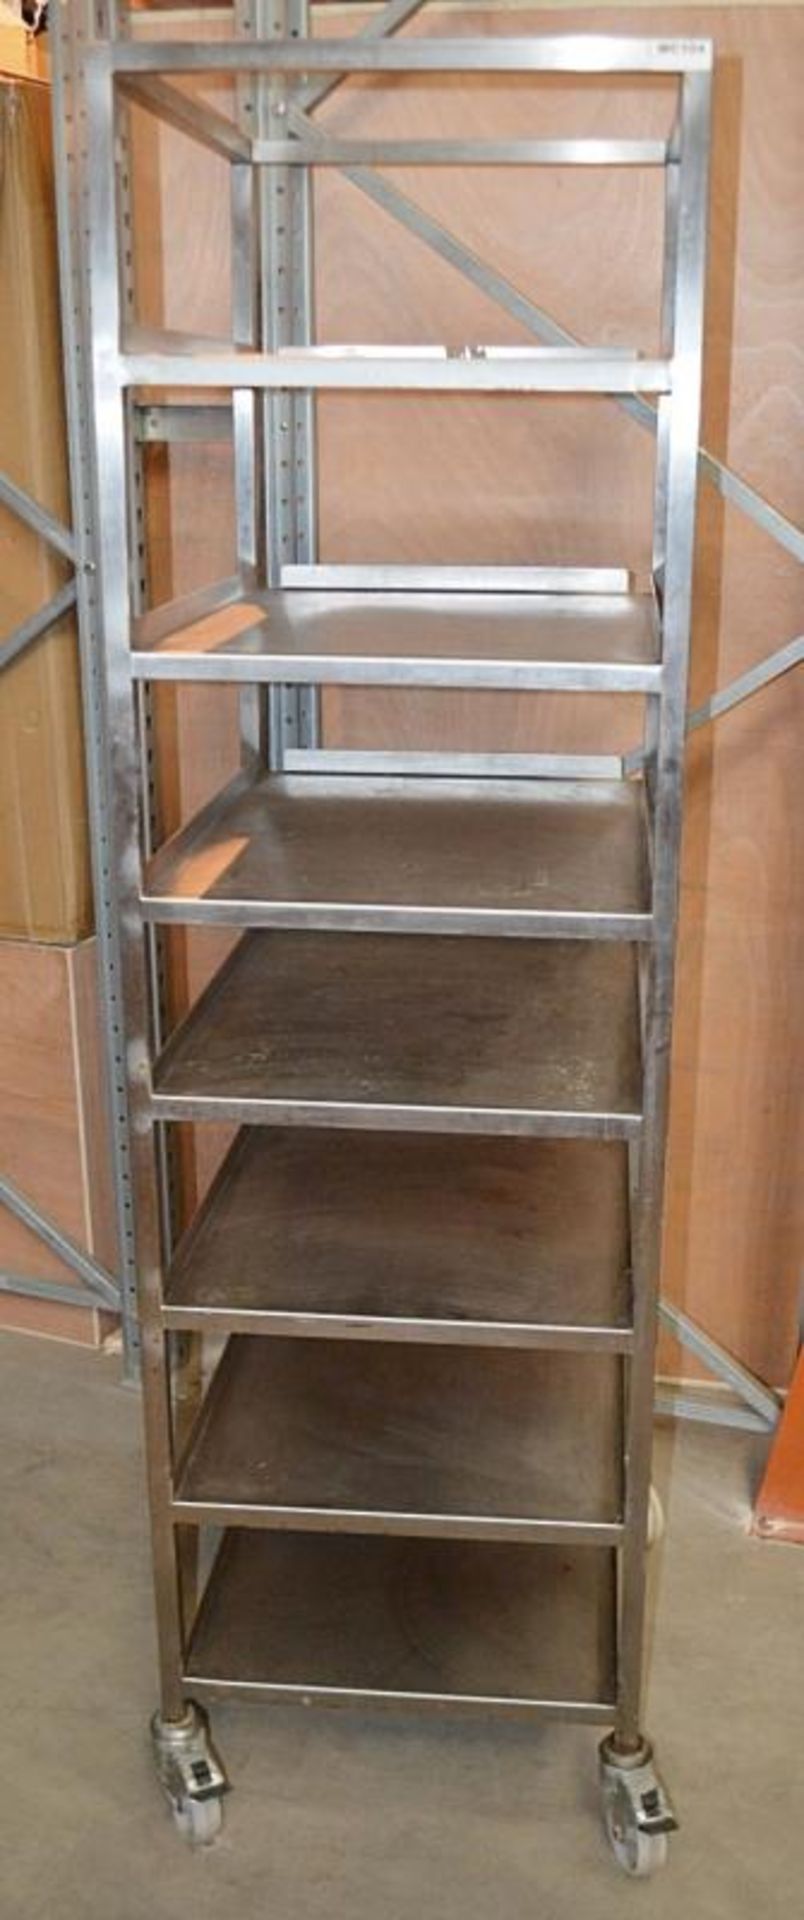 1 x Stainless Steel Commercial Kitchen 7-Teir Trolley On Castors - Dimensions: H185 x W54 x D64cm - - Image 3 of 4